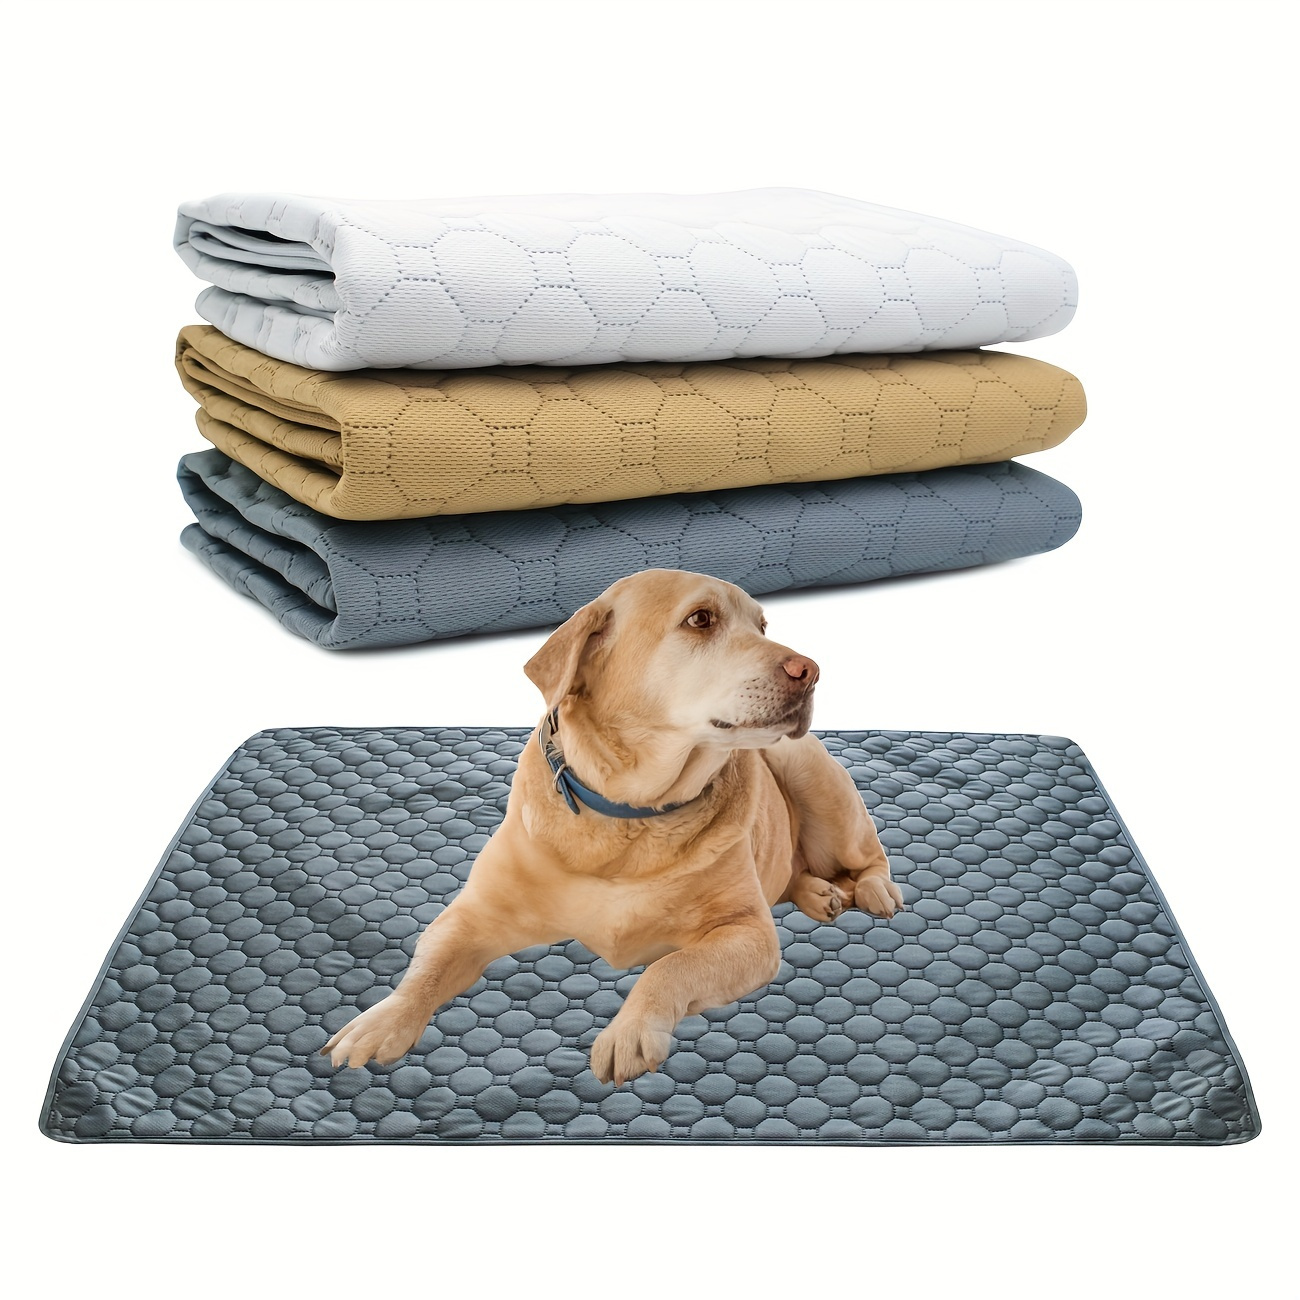 

Washable Pee Pads For Dogs, Non Slip Puppy Pads Pet Training Pads For Whelping, Potty, Housebreaking